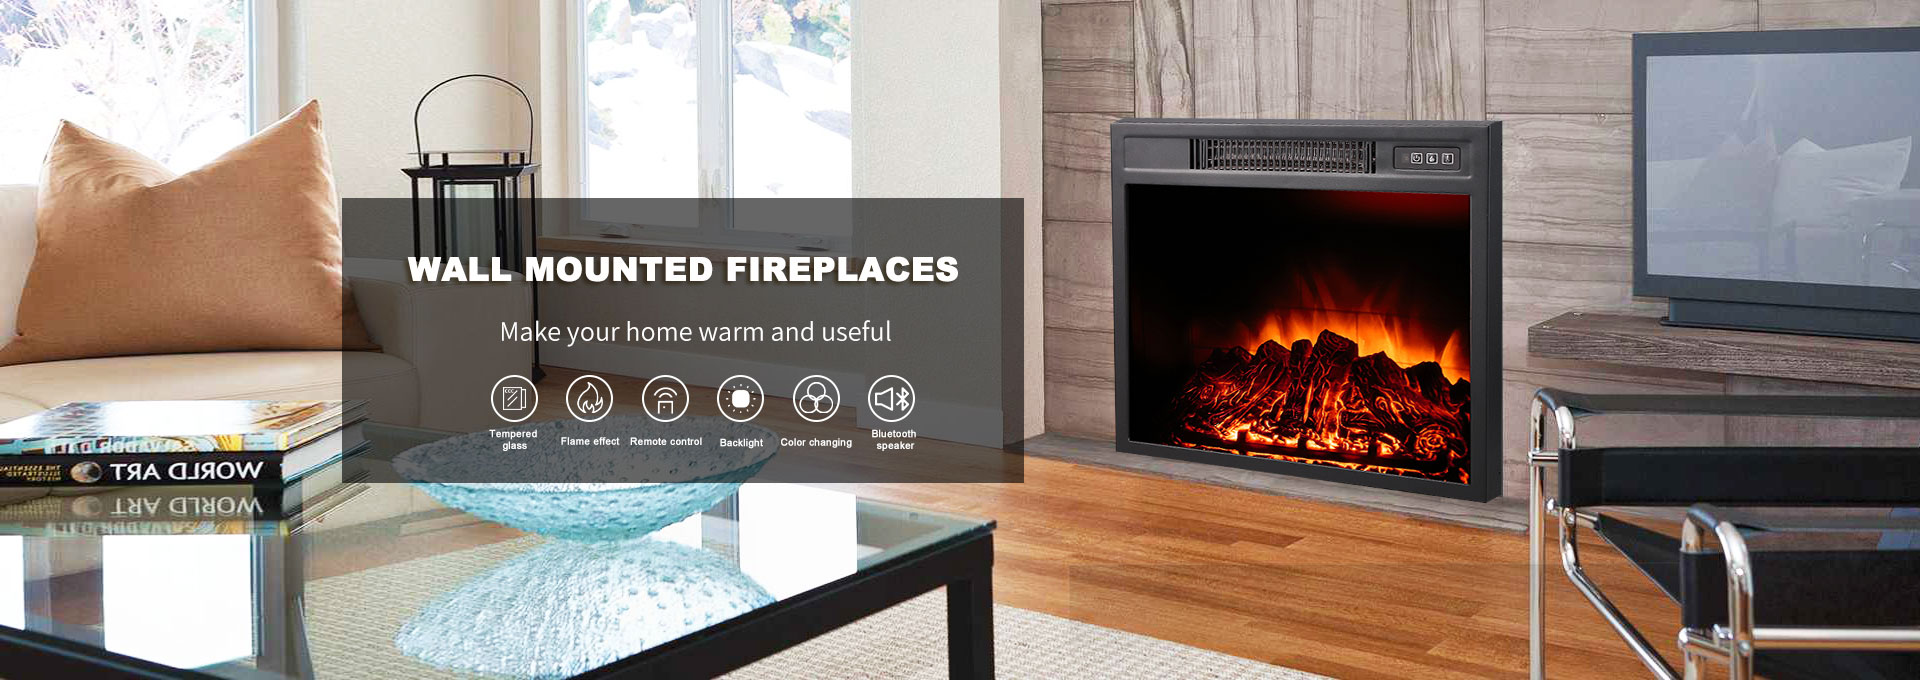 Wall Mounted Fireplace Heater Manufacturers